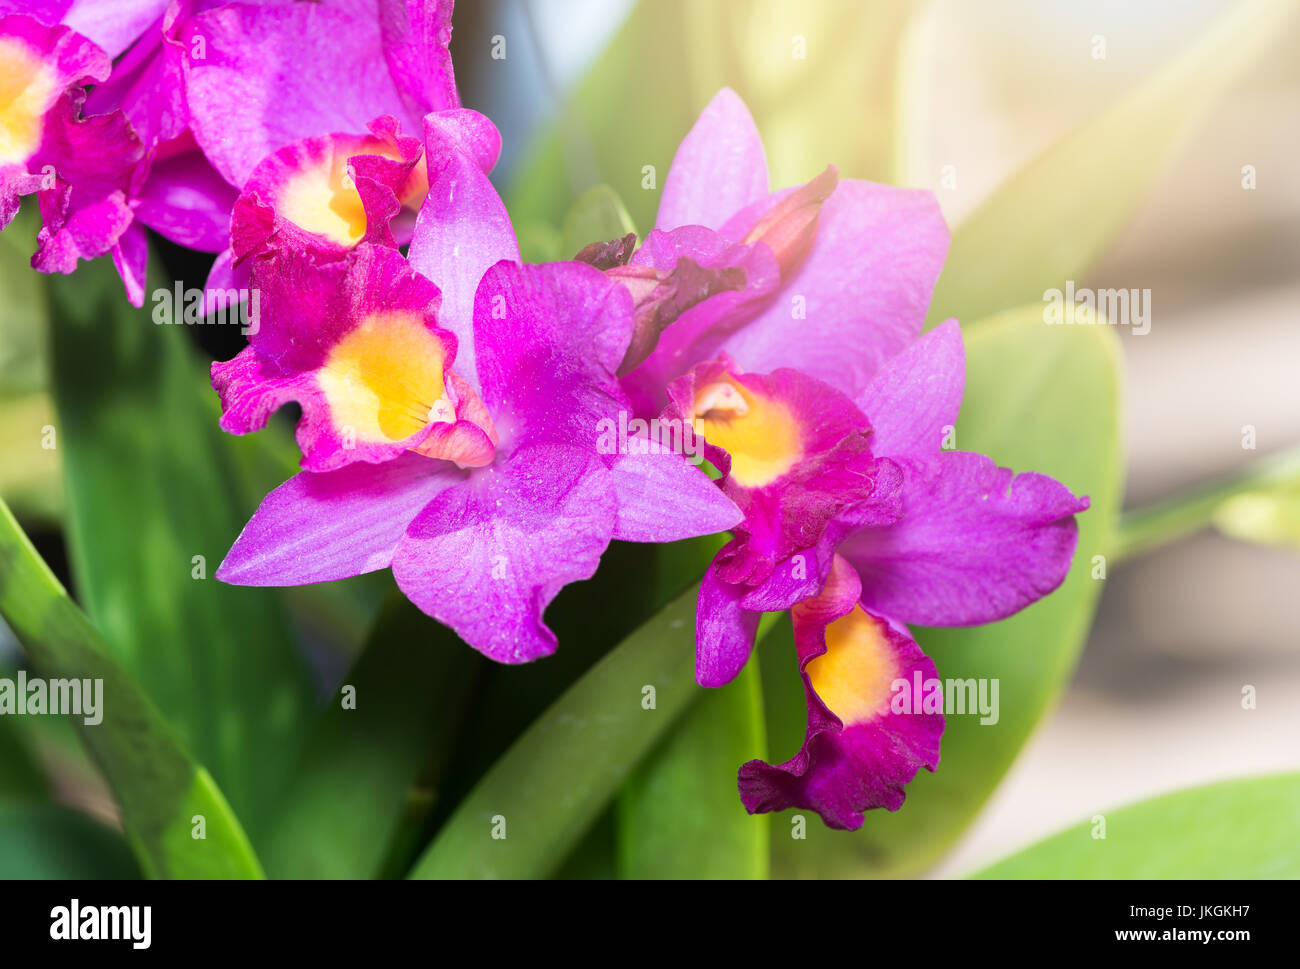 beautiful vibrant pink cattleya orchid flower blossom with sunlight. Stock Photo